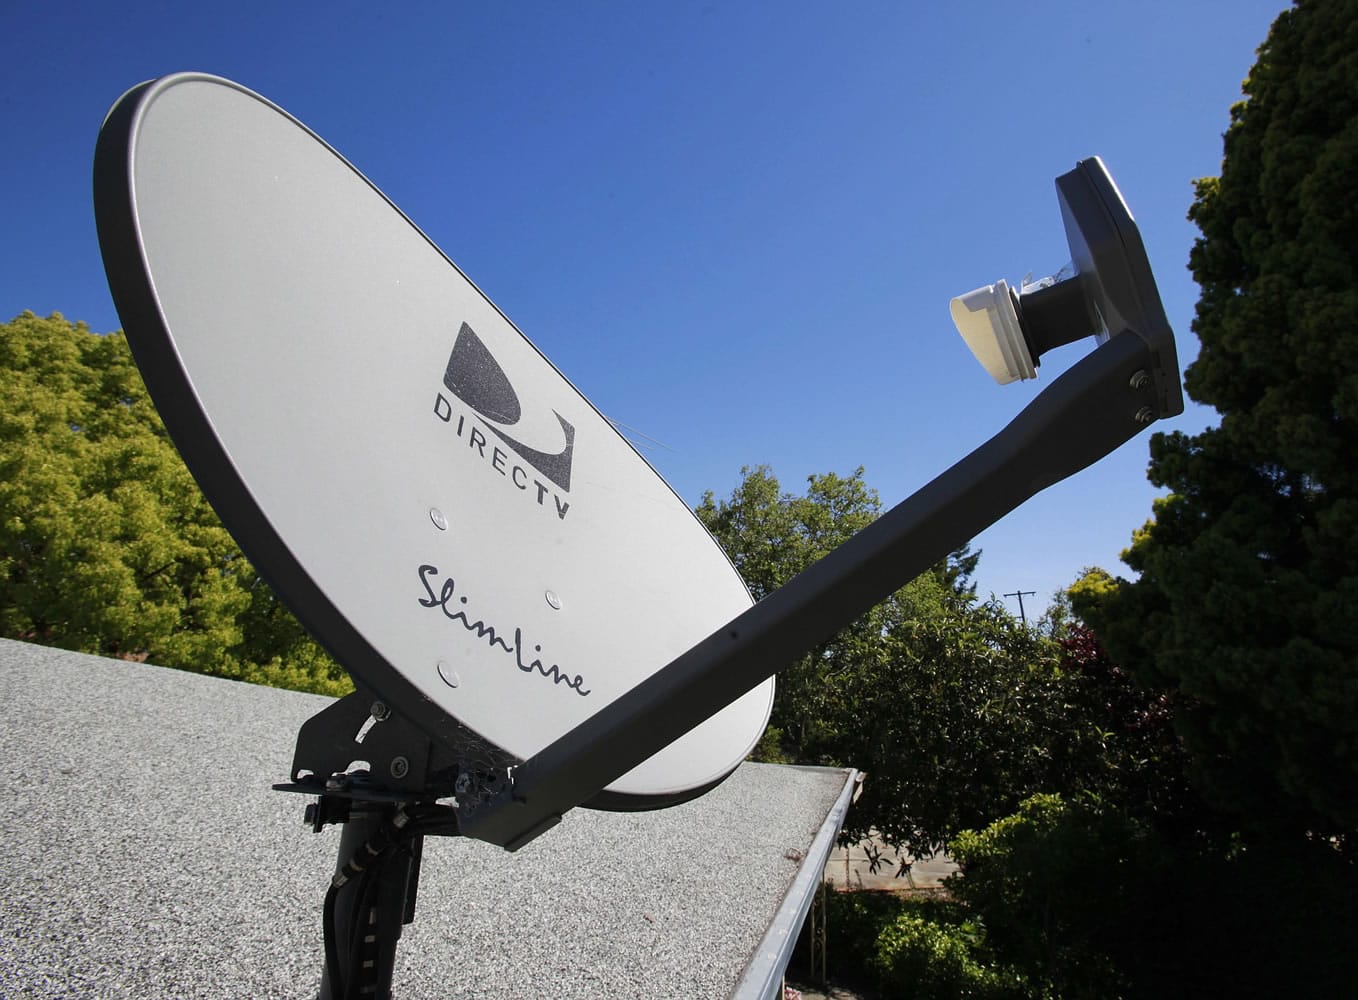 A DirecTV satellite dish is attached to a roof at a home in Palo Alto, Calif.